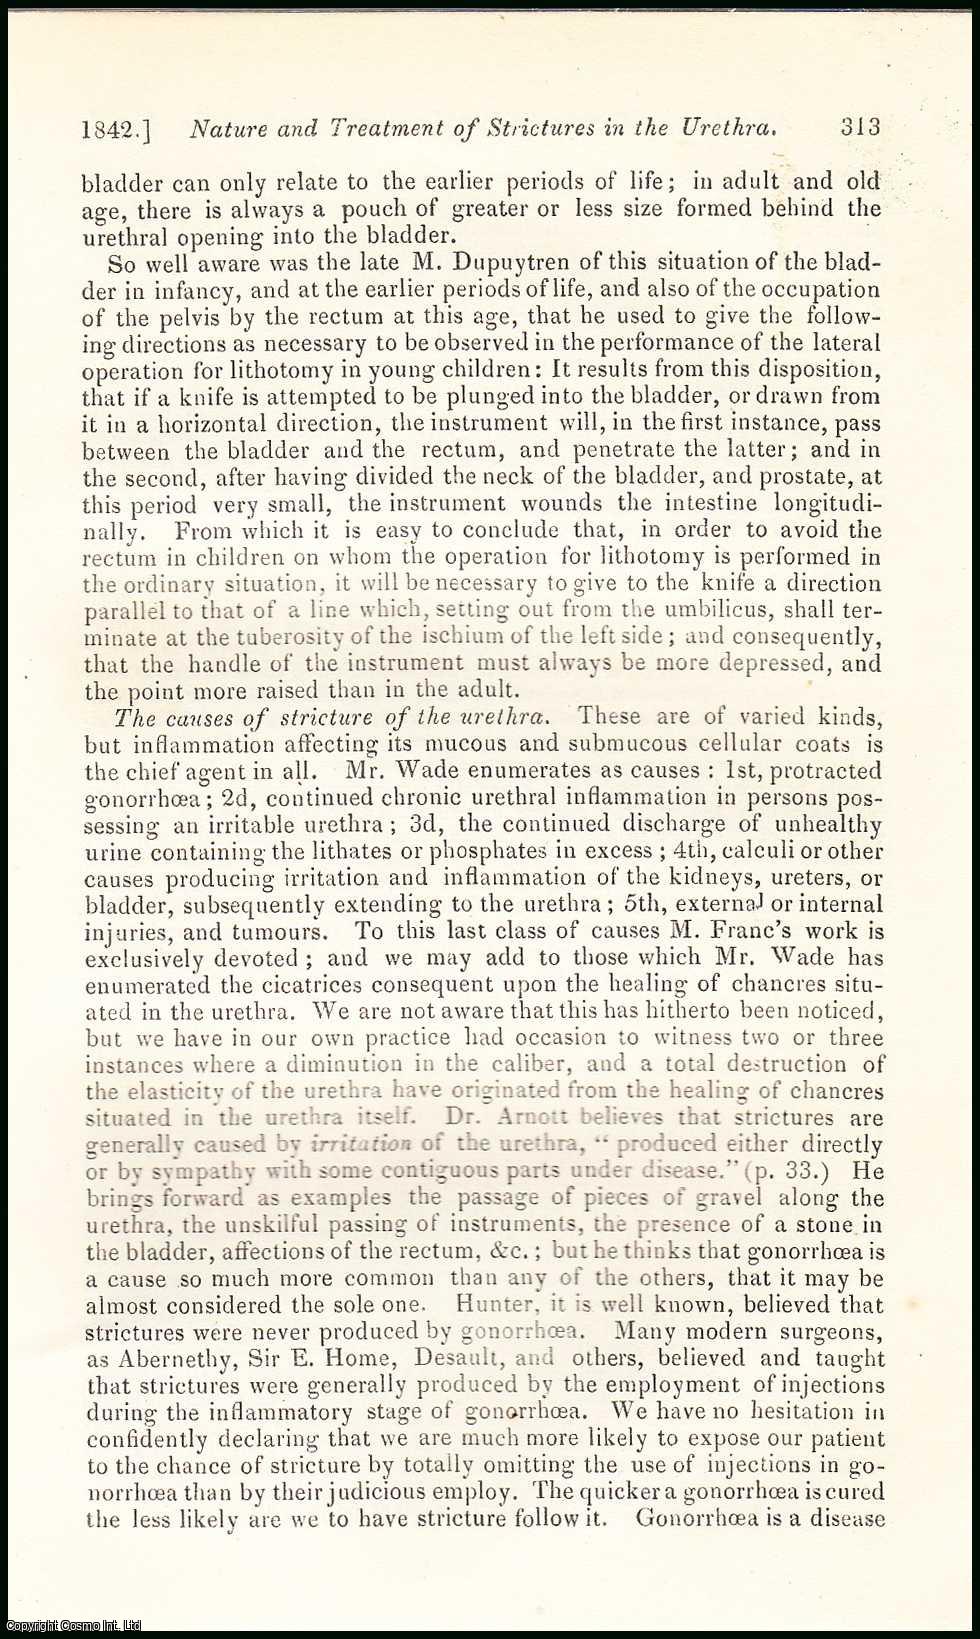 Dr. J.A. Arntzenius, Doctor of Medicine & Surgery ; James Arnott, M.D., Late Superintendent Surgeon in the Honorable East India Company's Service & others. - The Nature & Treatment of Strictures in the Urethra. An uncommon original article from the British and Foreign Medical Review, 1842.